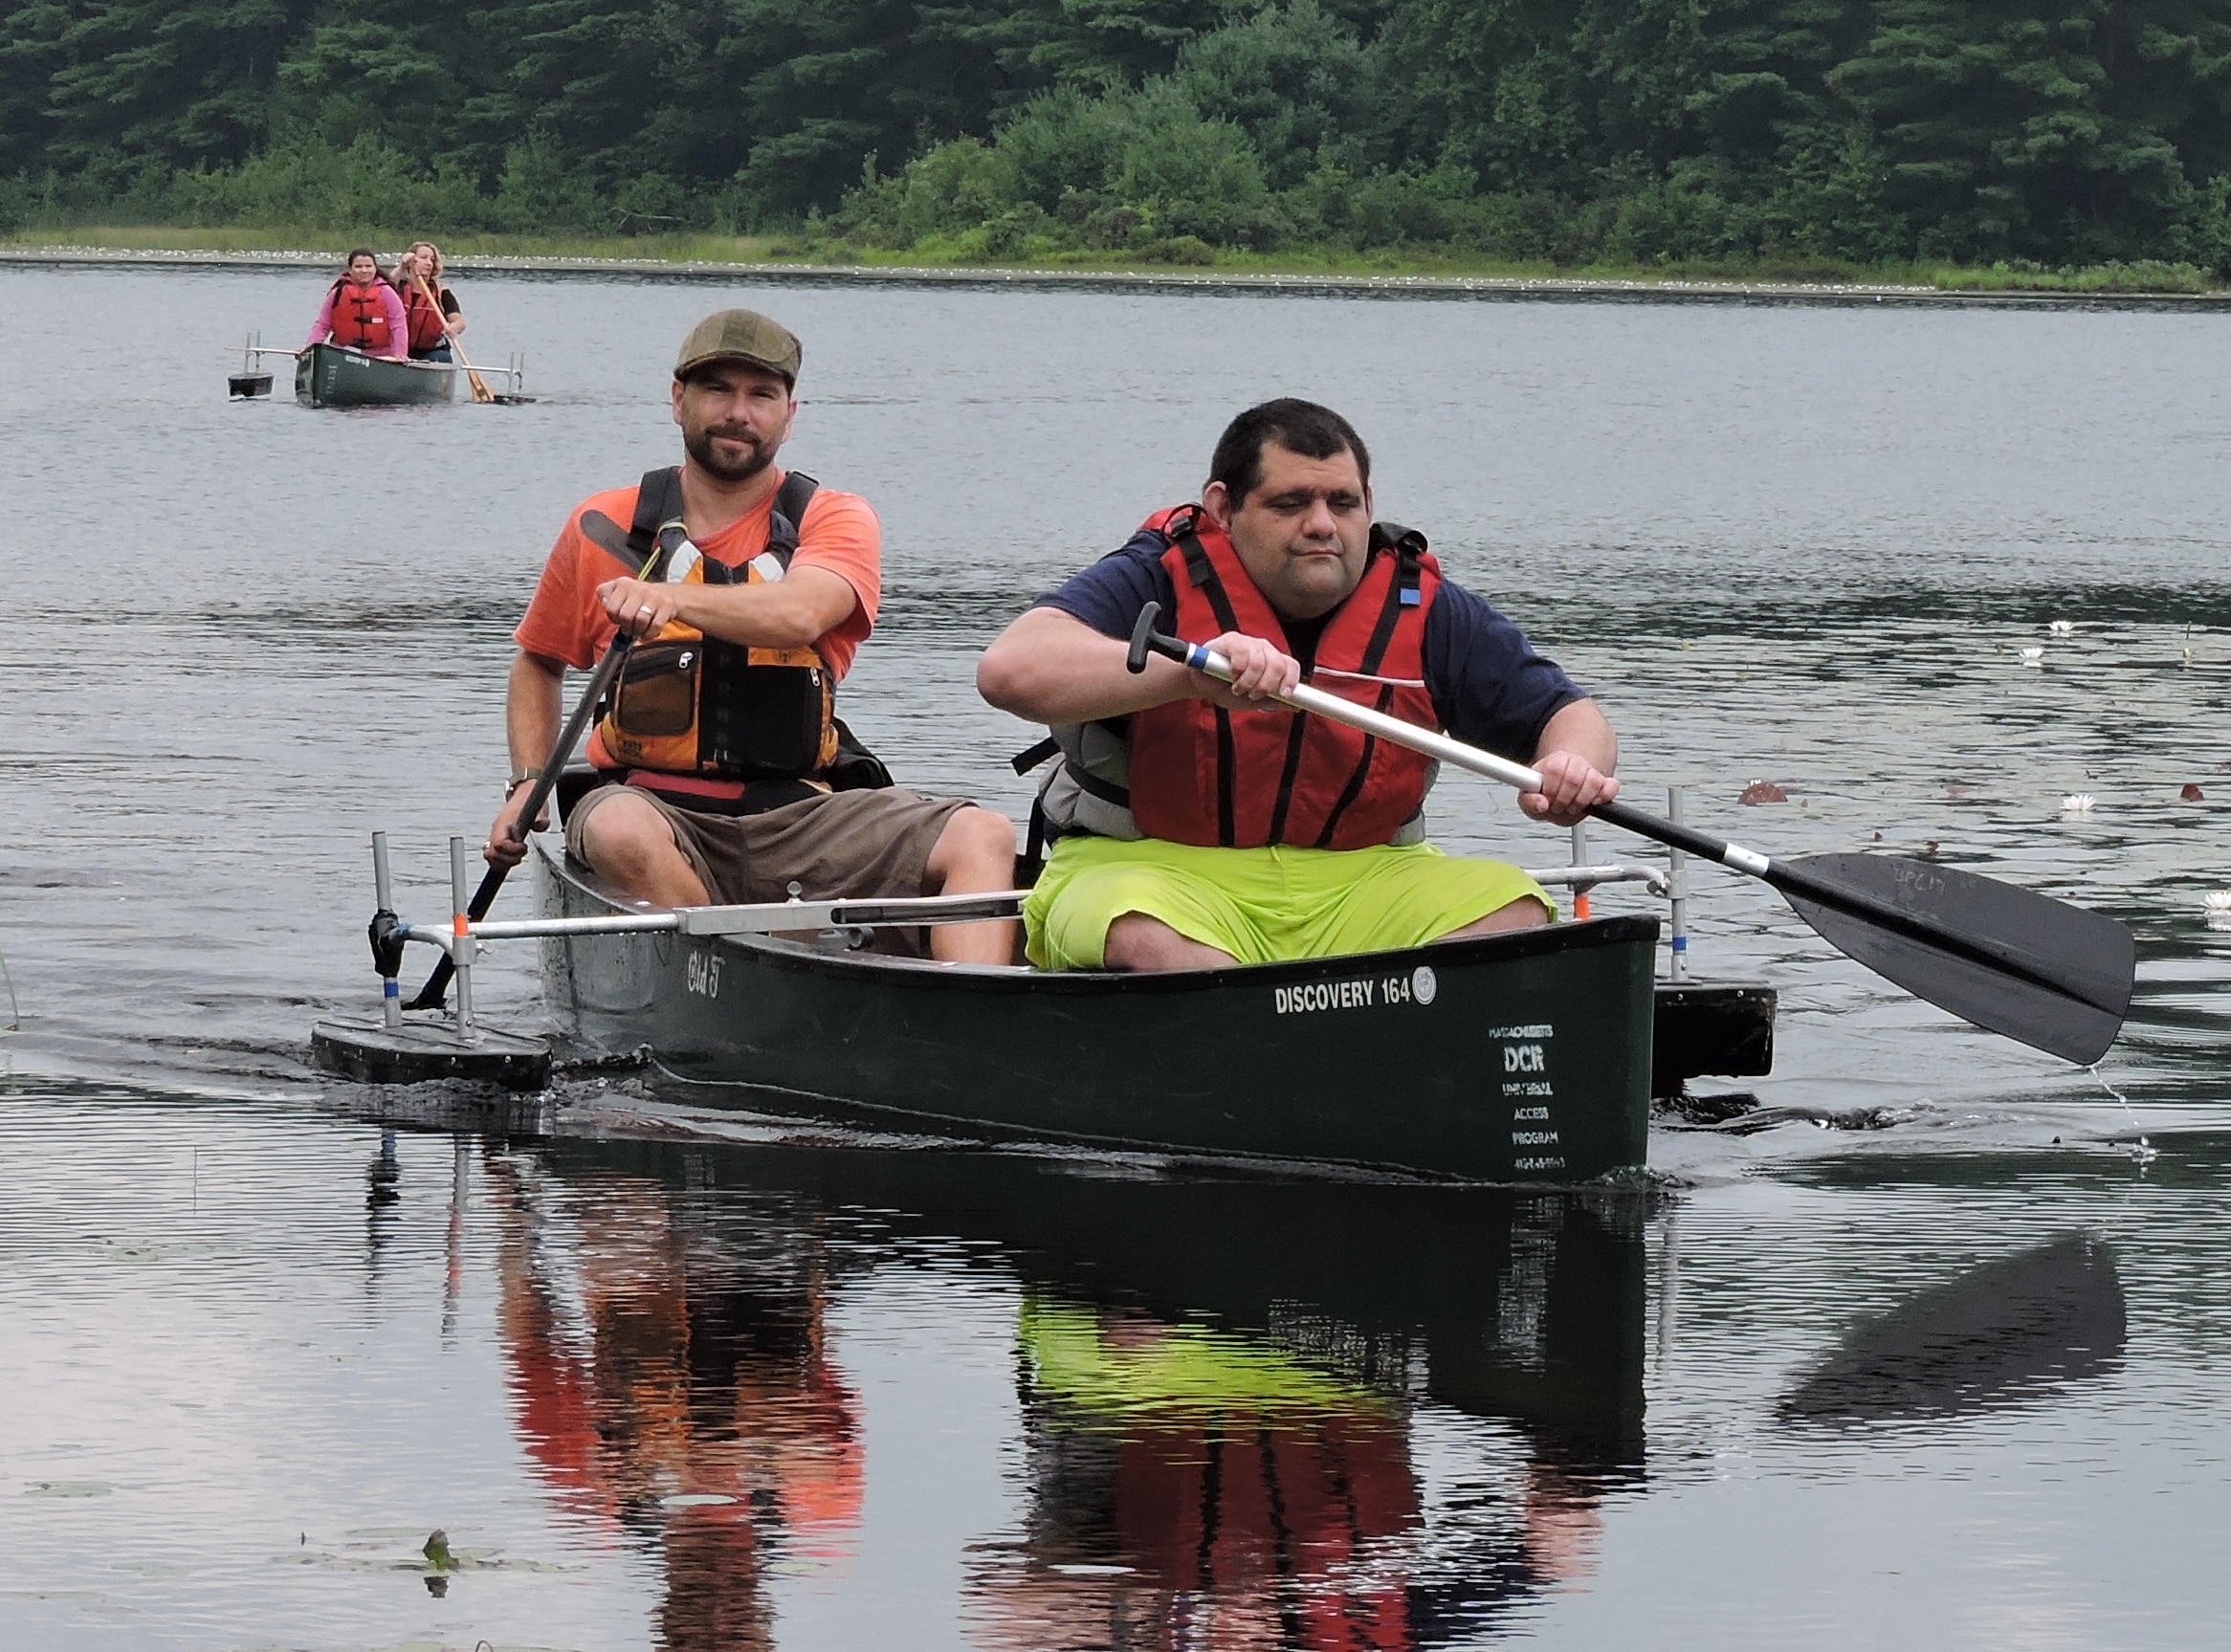 Two paddlers in a canoe with outriggers. Another canoe with outriggers is behind them.